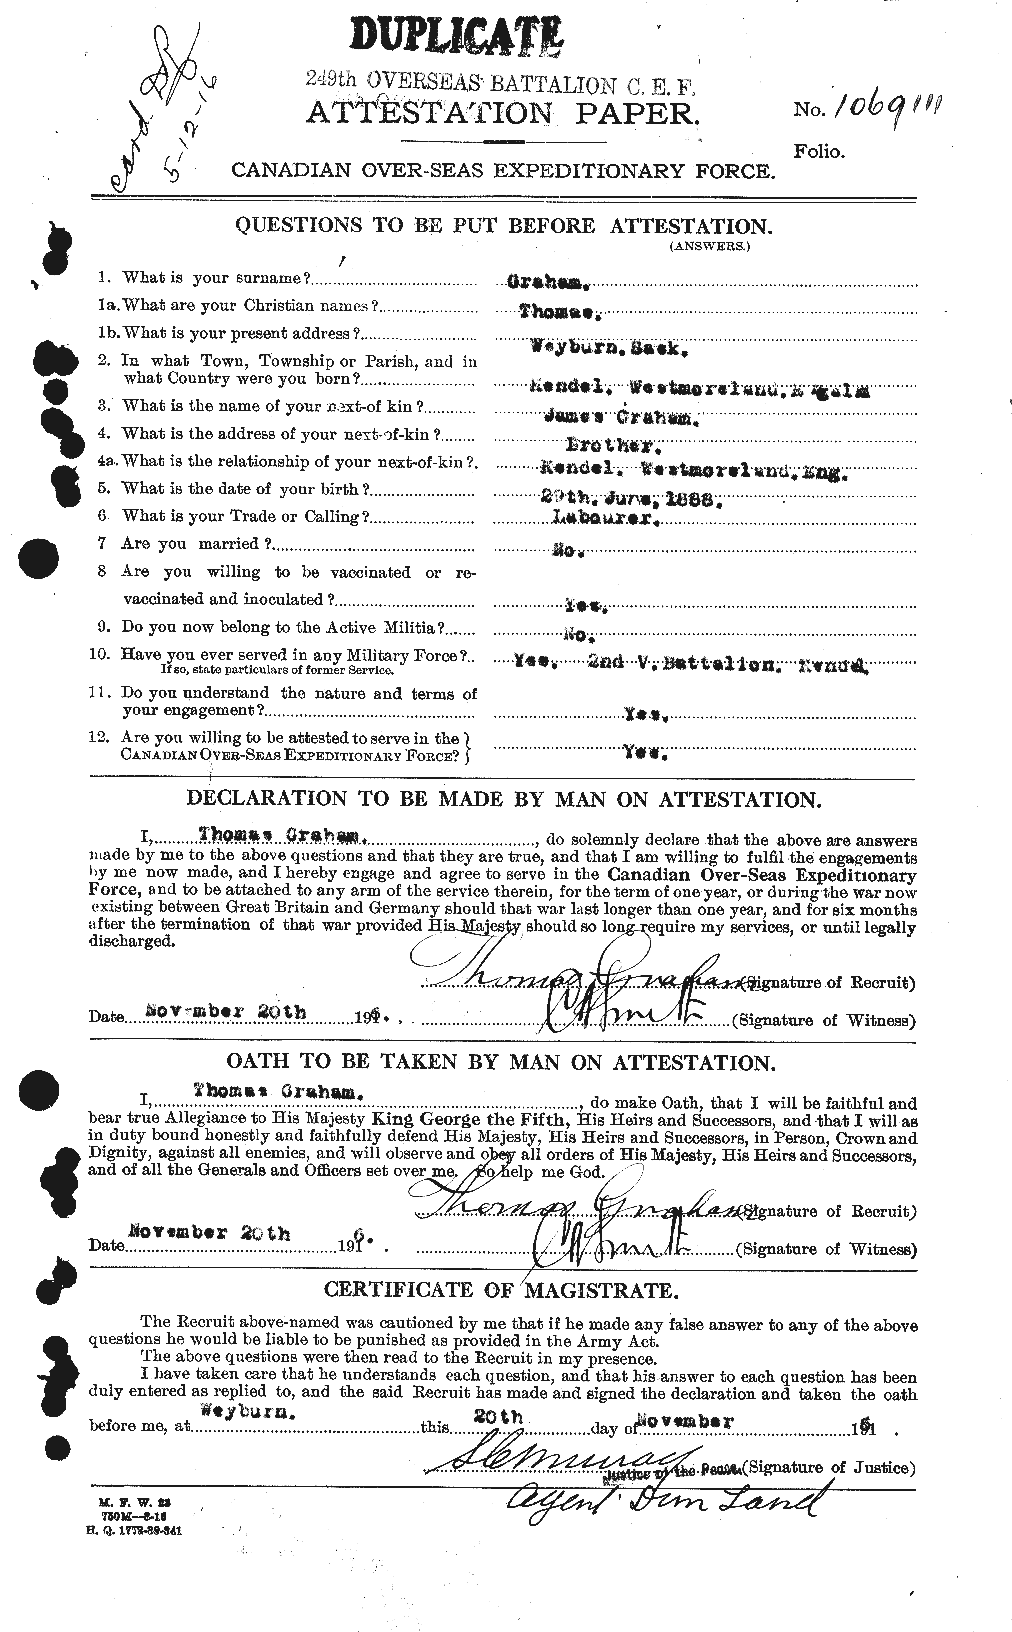 Personnel Records of the First World War - CEF 359500a